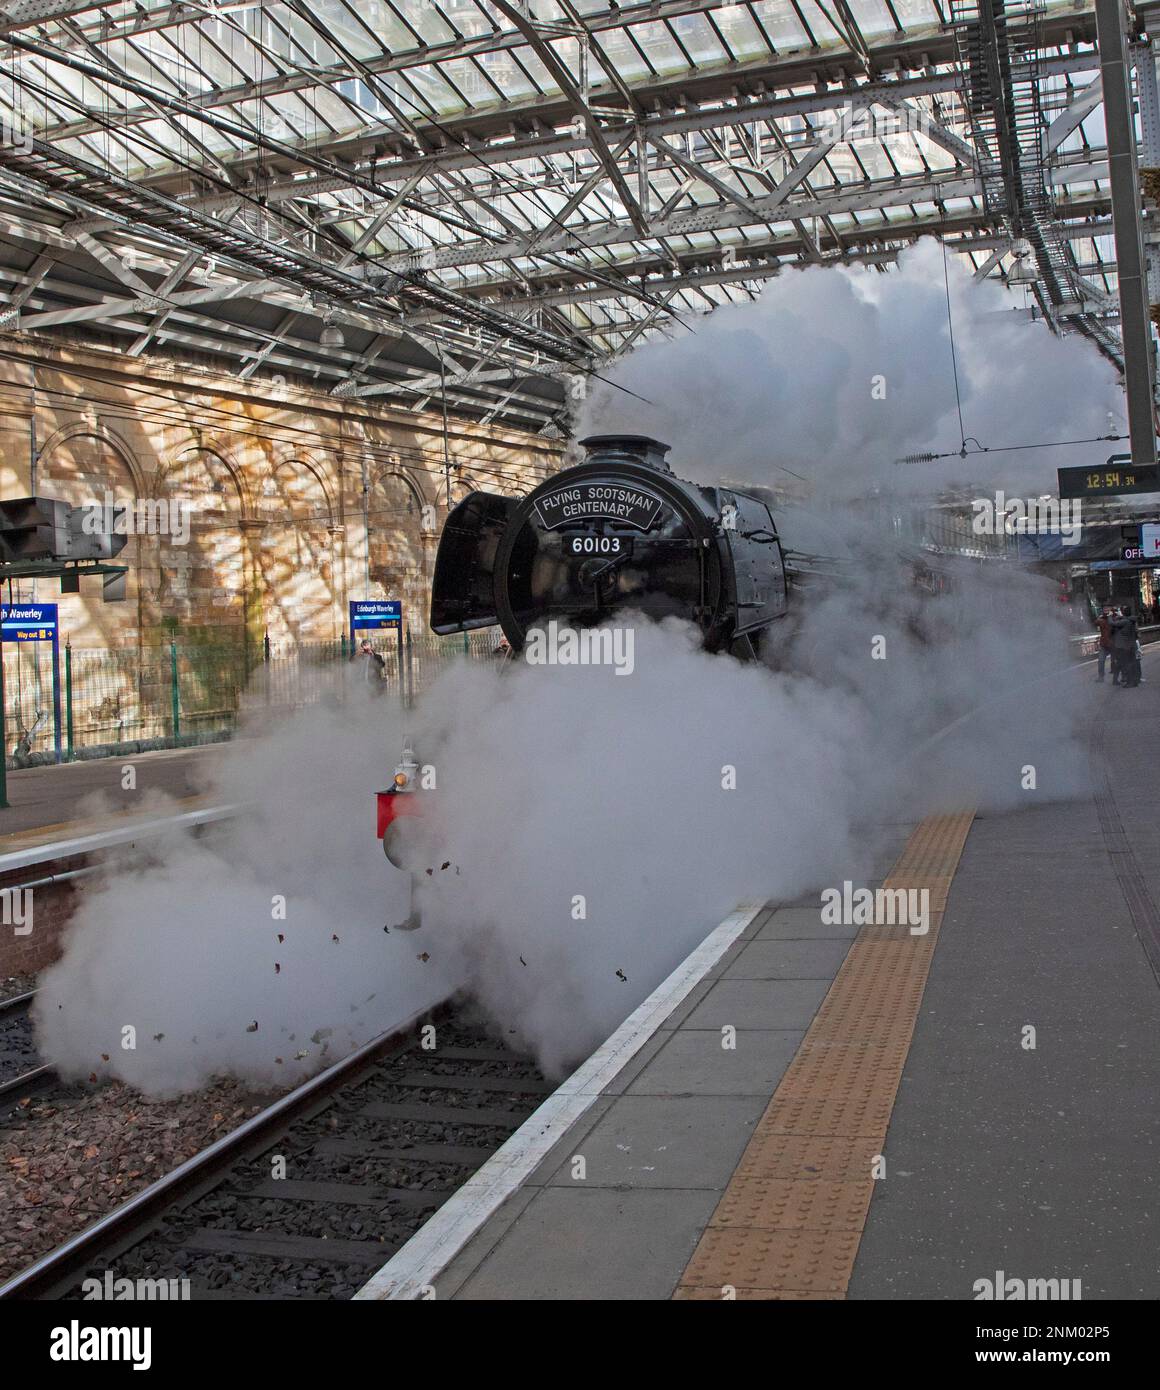 Edinburgh, Scotland, UK. 24 February 2023. The Flying Scotsman Centenary steam engine leaves Edinburgh Waverley after a reception for invited guests, celebrating 100 years of the golden age of British ingenuity, invention and craftmanship. Credit: Archwhite/alamy live news. Stock Photo